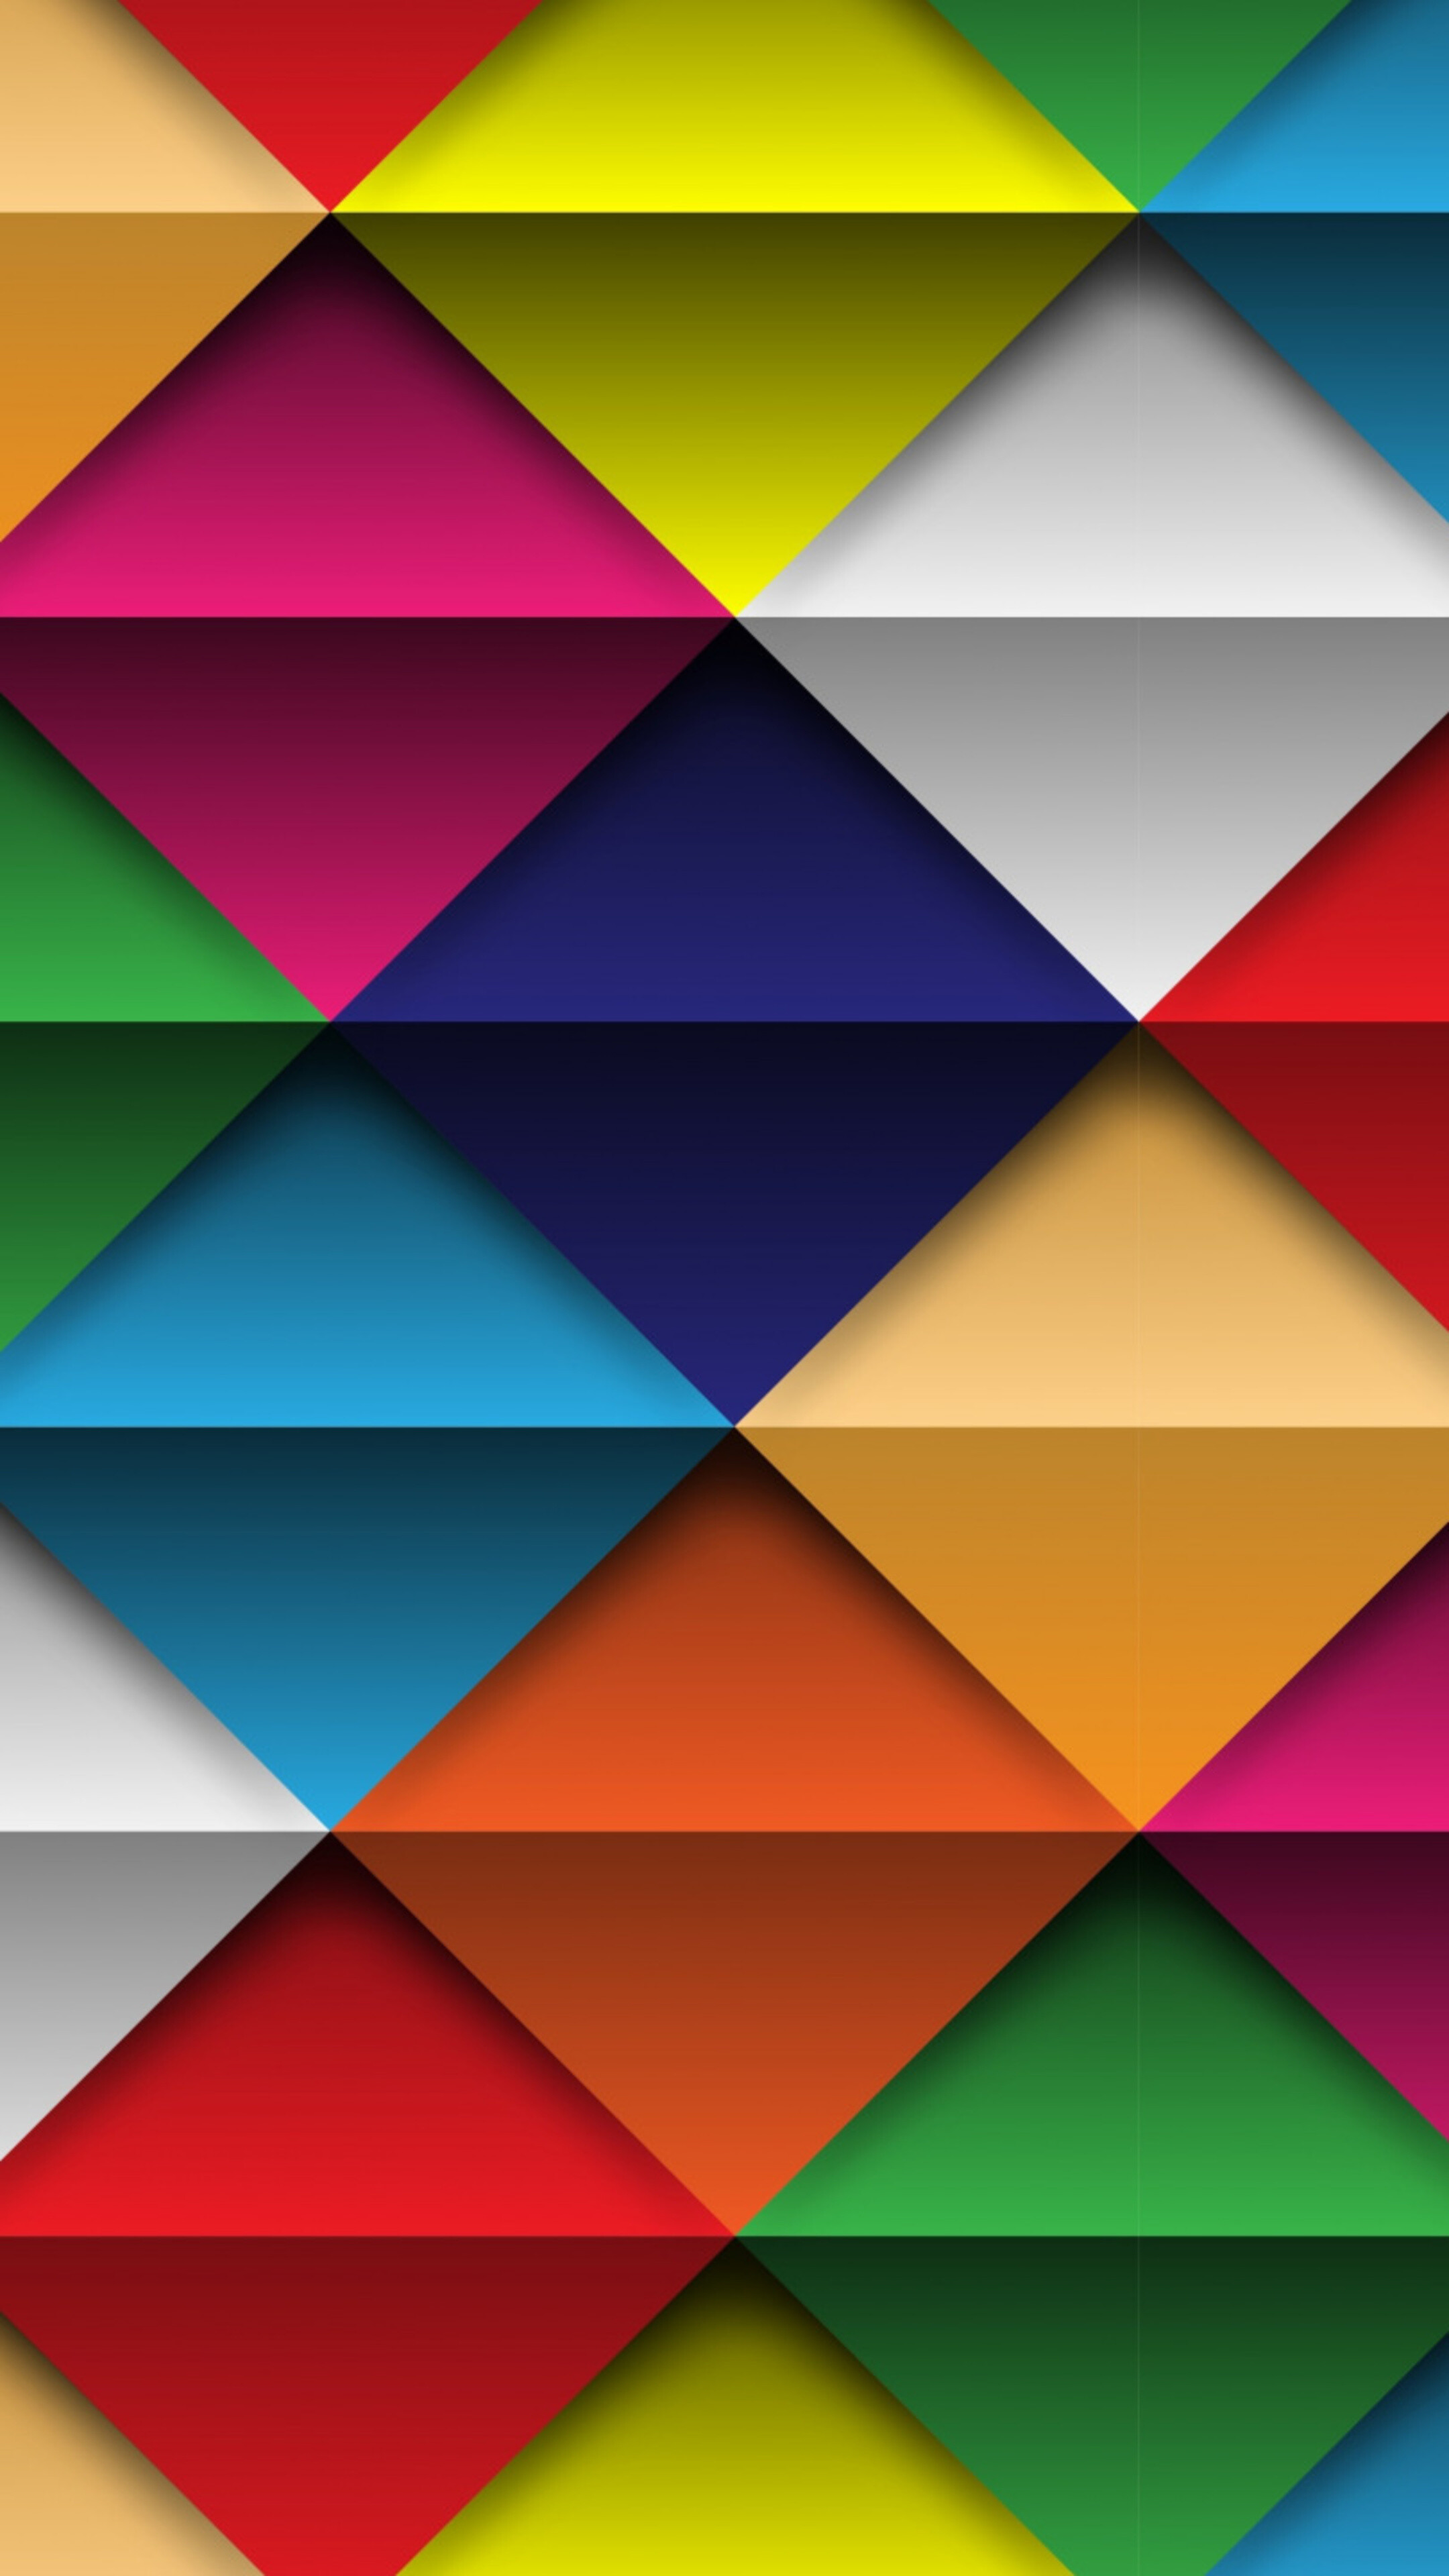 Geometric Abstract: Colorful shapes, Triangle, Right angles, Squares. 2160x3840 4K Background.